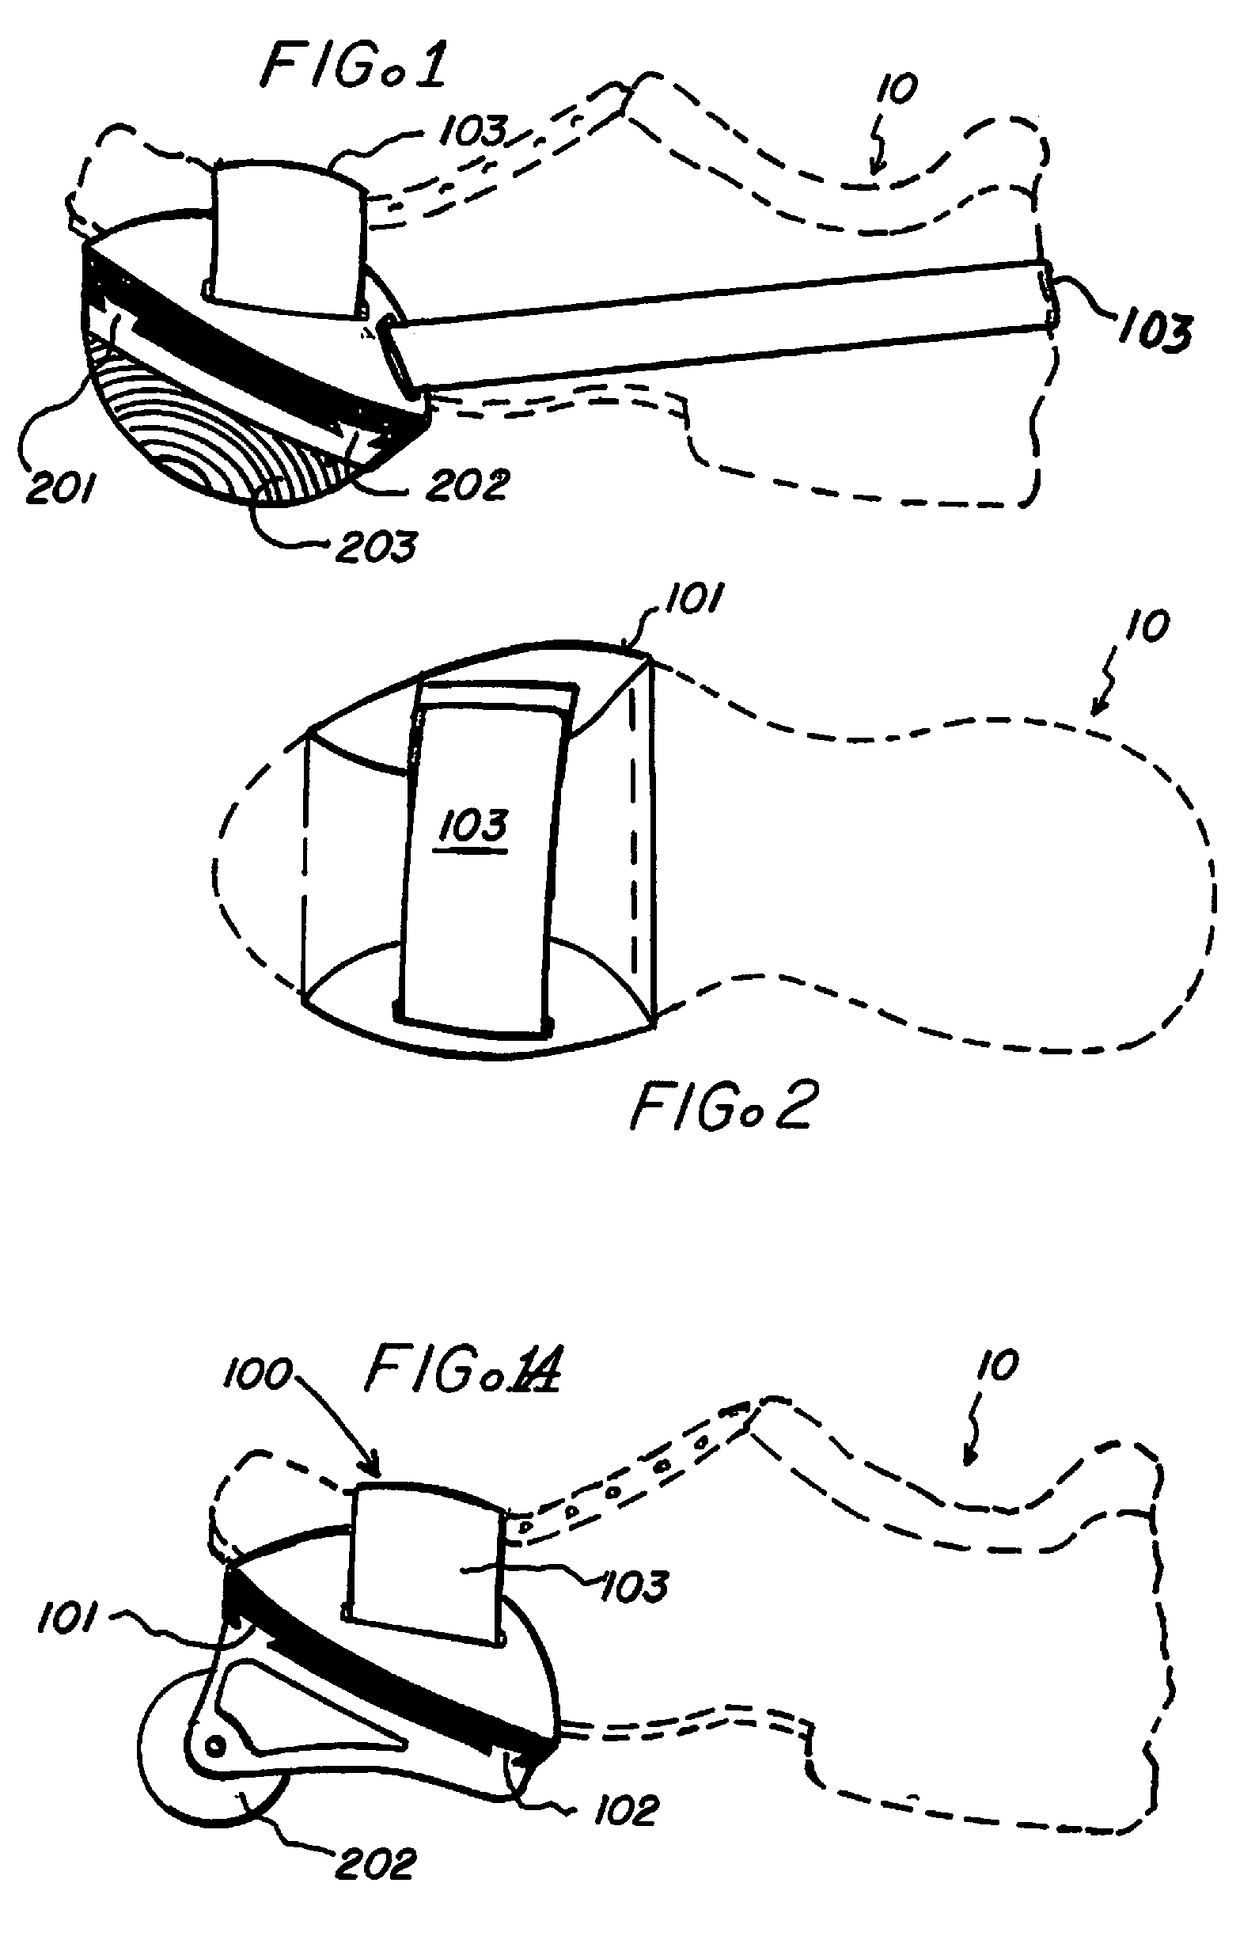 Removable exercise attachment device for footwear